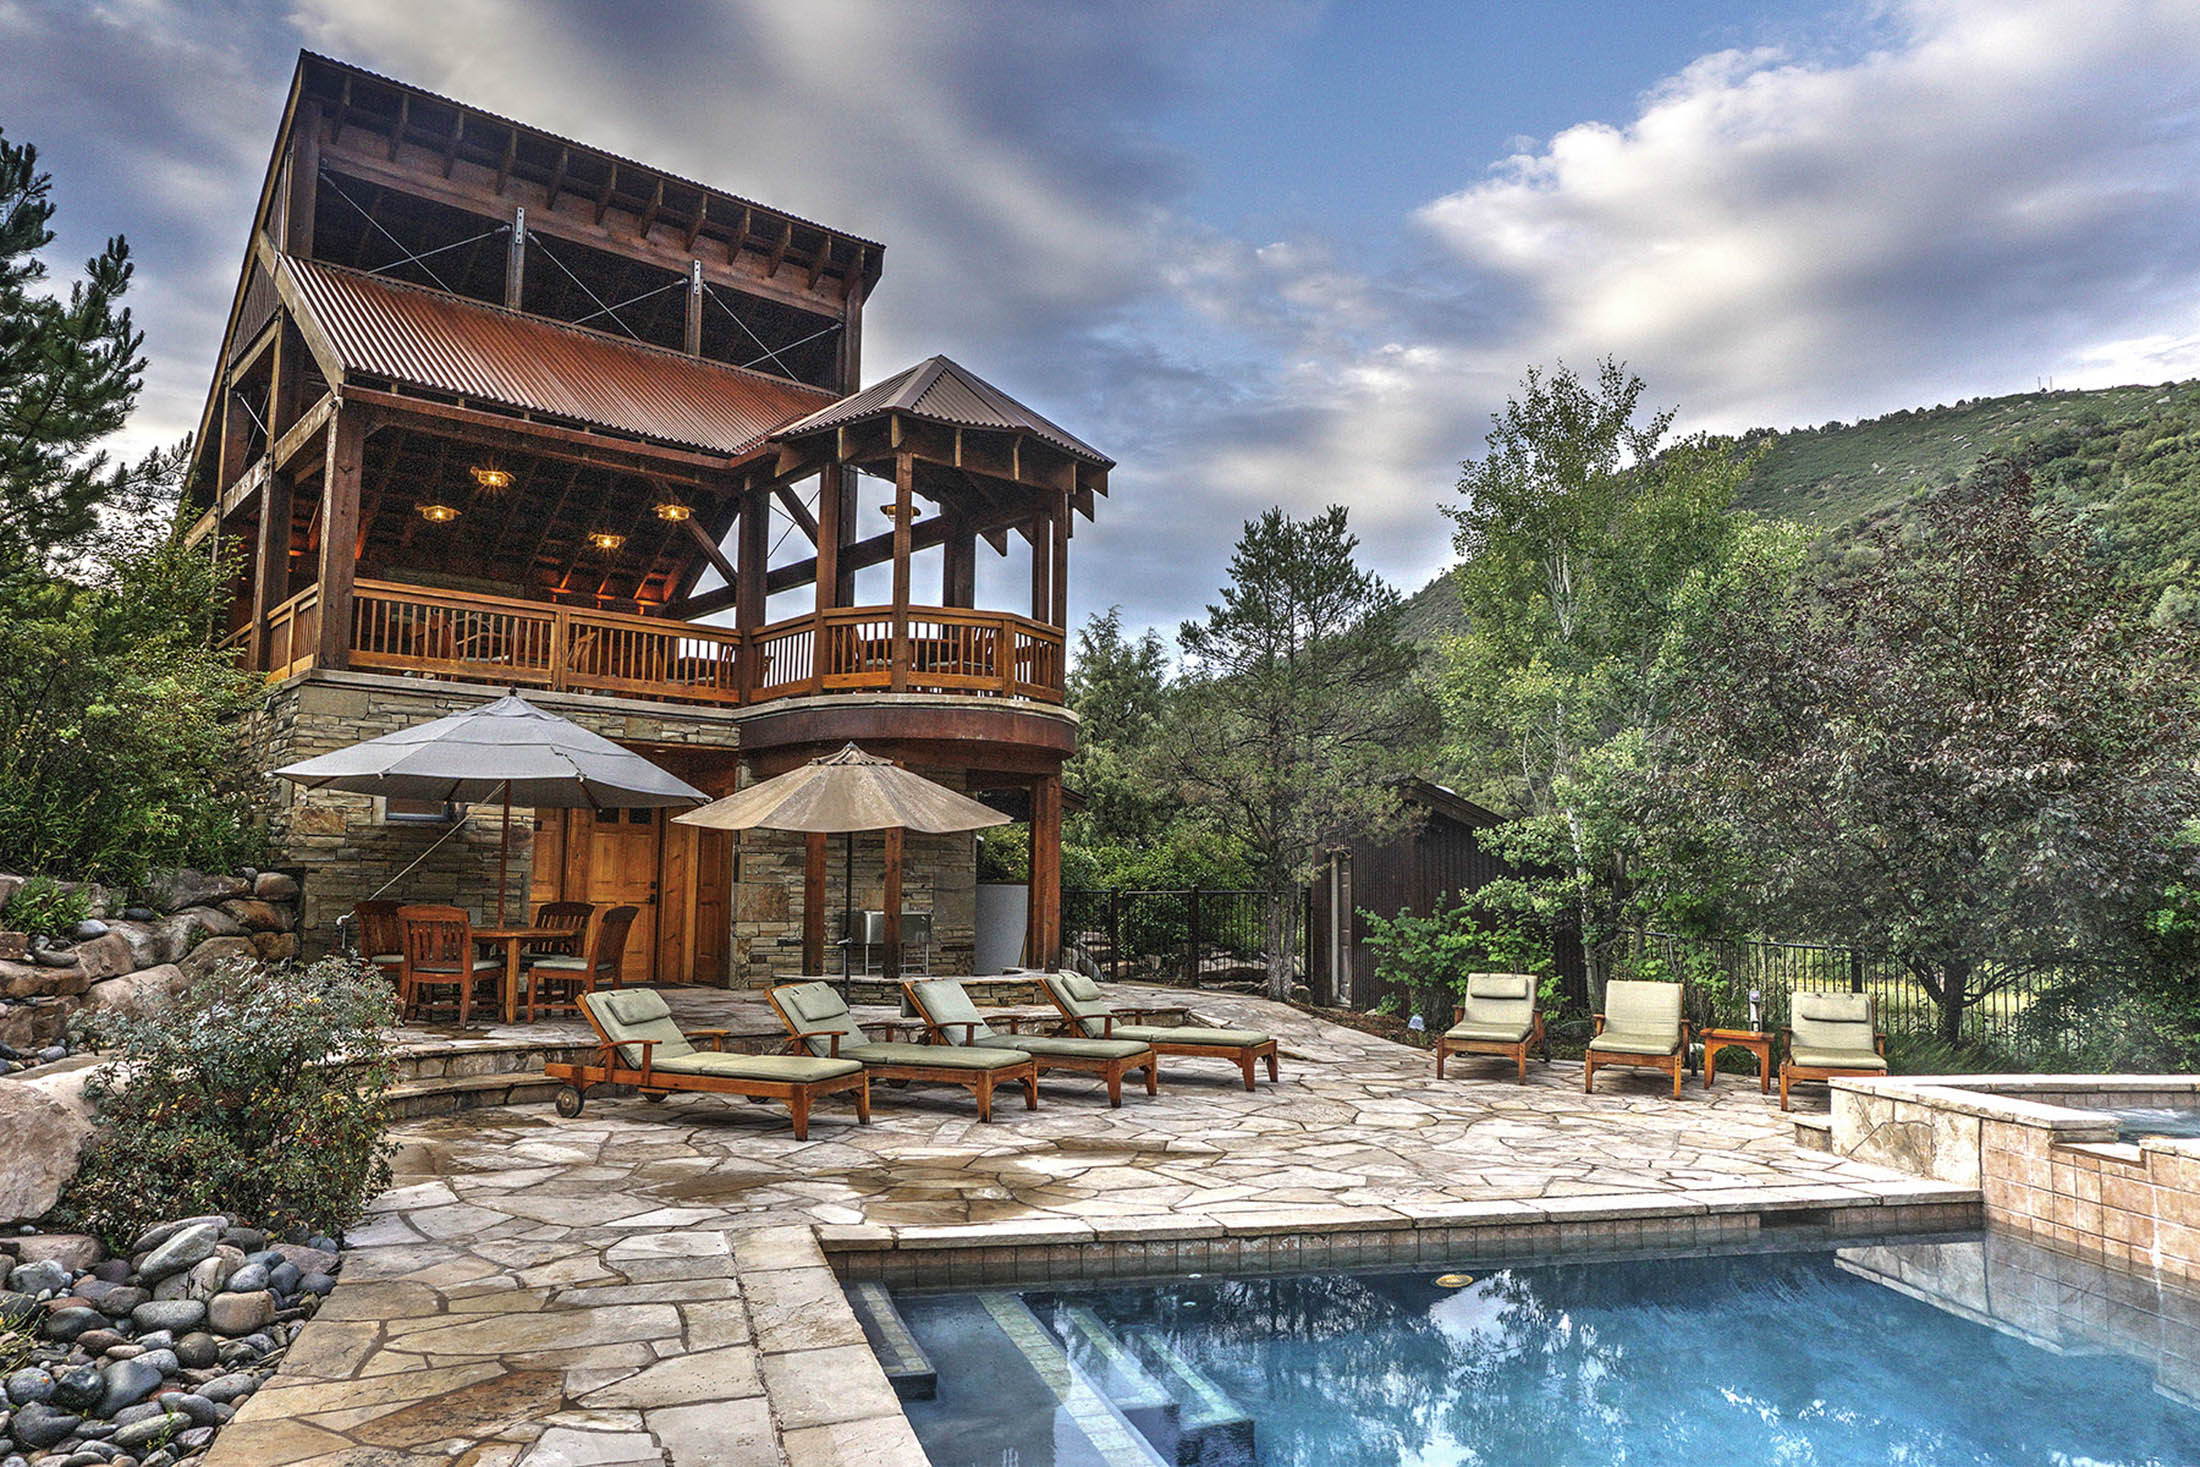 This $6 Million Compound in Colorado Is a Fly Fisher's Paradise - Bloomberg